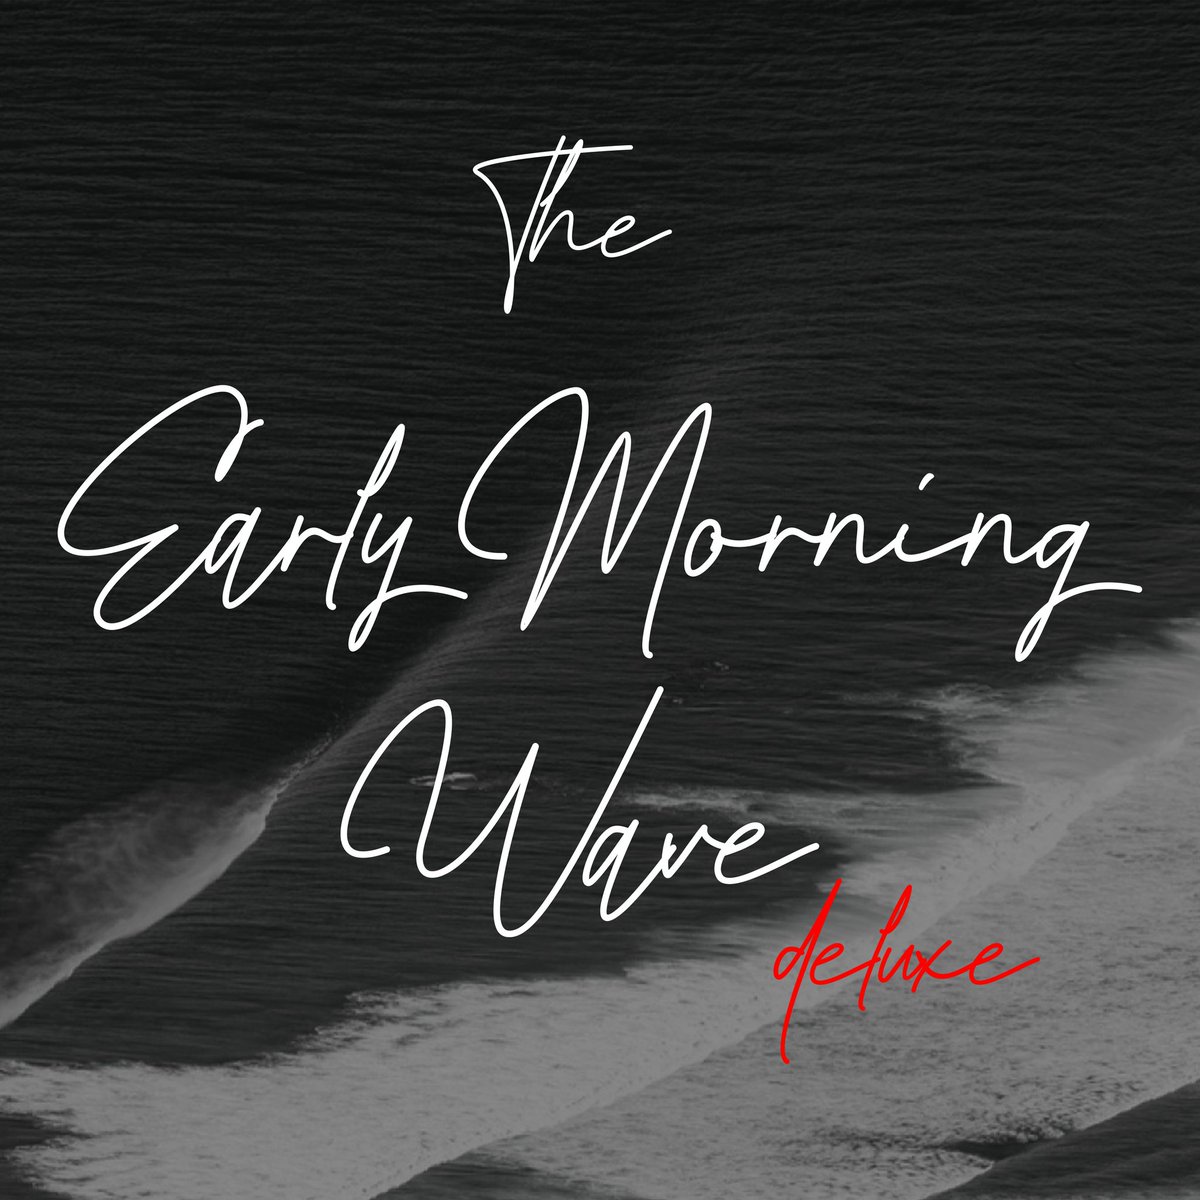 The Early Morning Wave (deluxe) is out now on all streaming platforms for your listening pleasure! Link: onerpm.link/691313503828